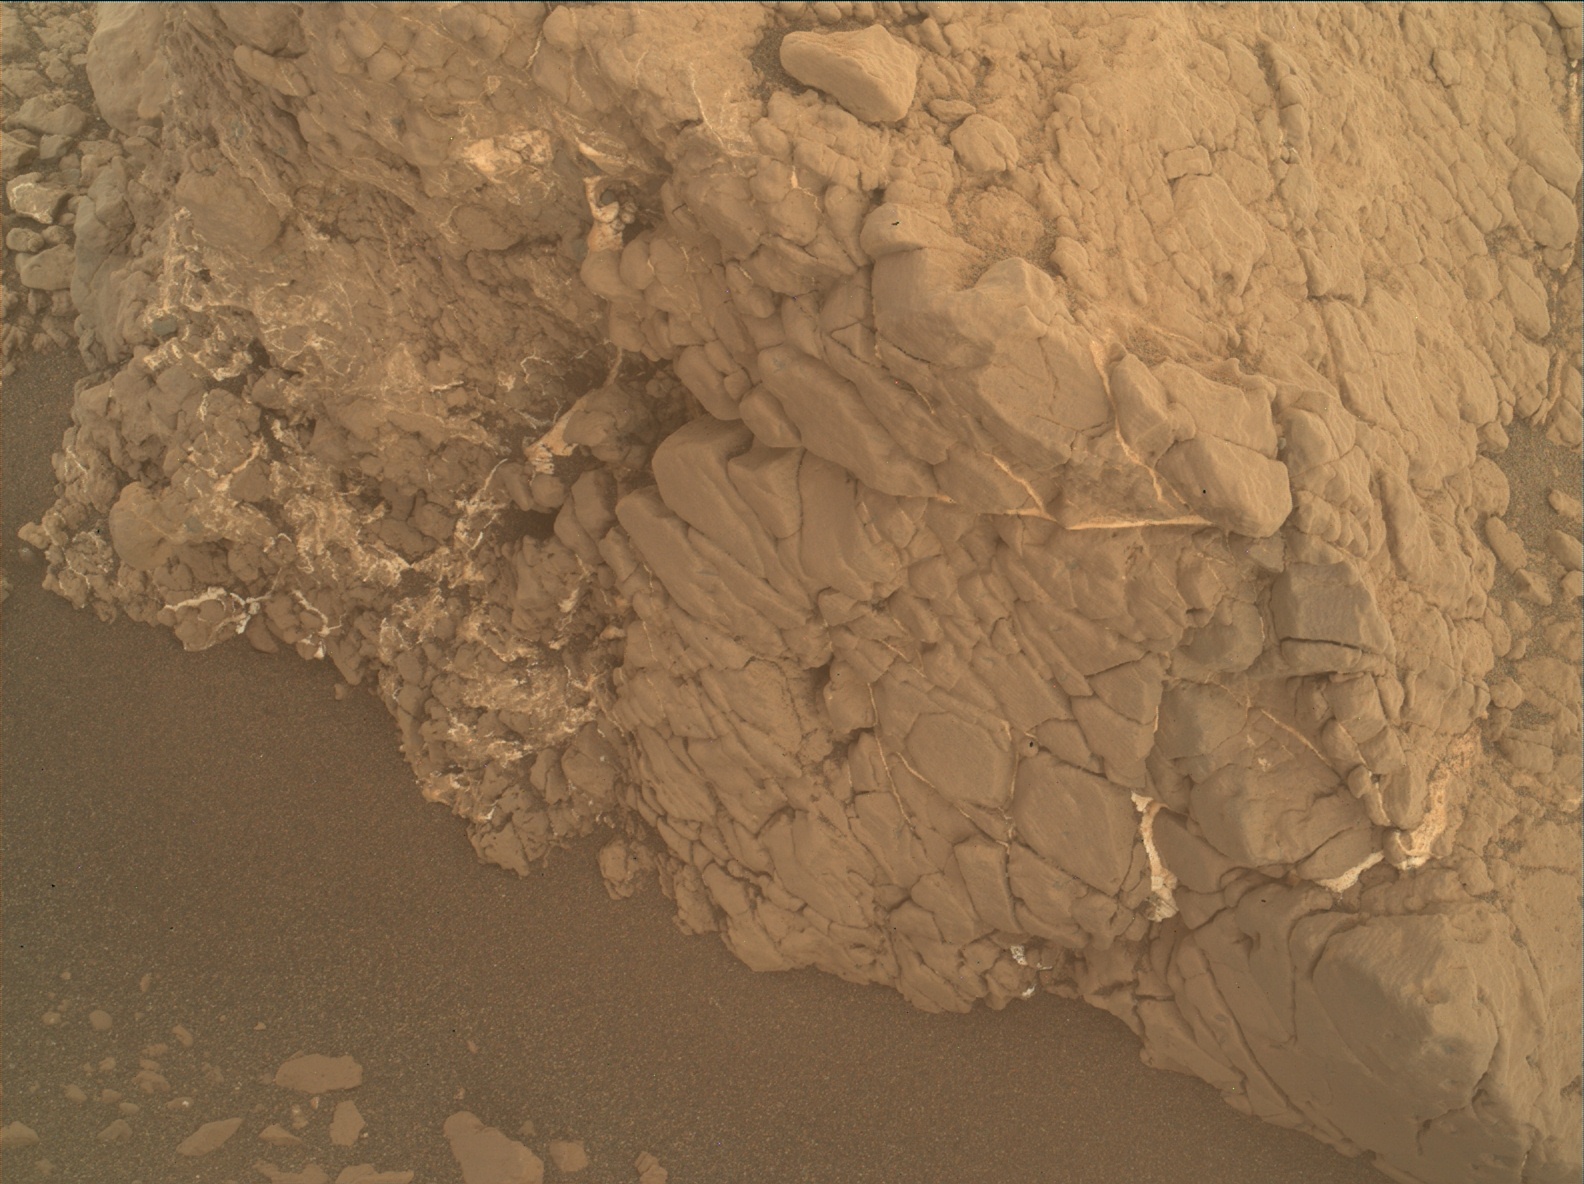 Nasa's Mars rover Curiosity acquired this image using its Mars Hand Lens Imager (MAHLI) on Sol 2568